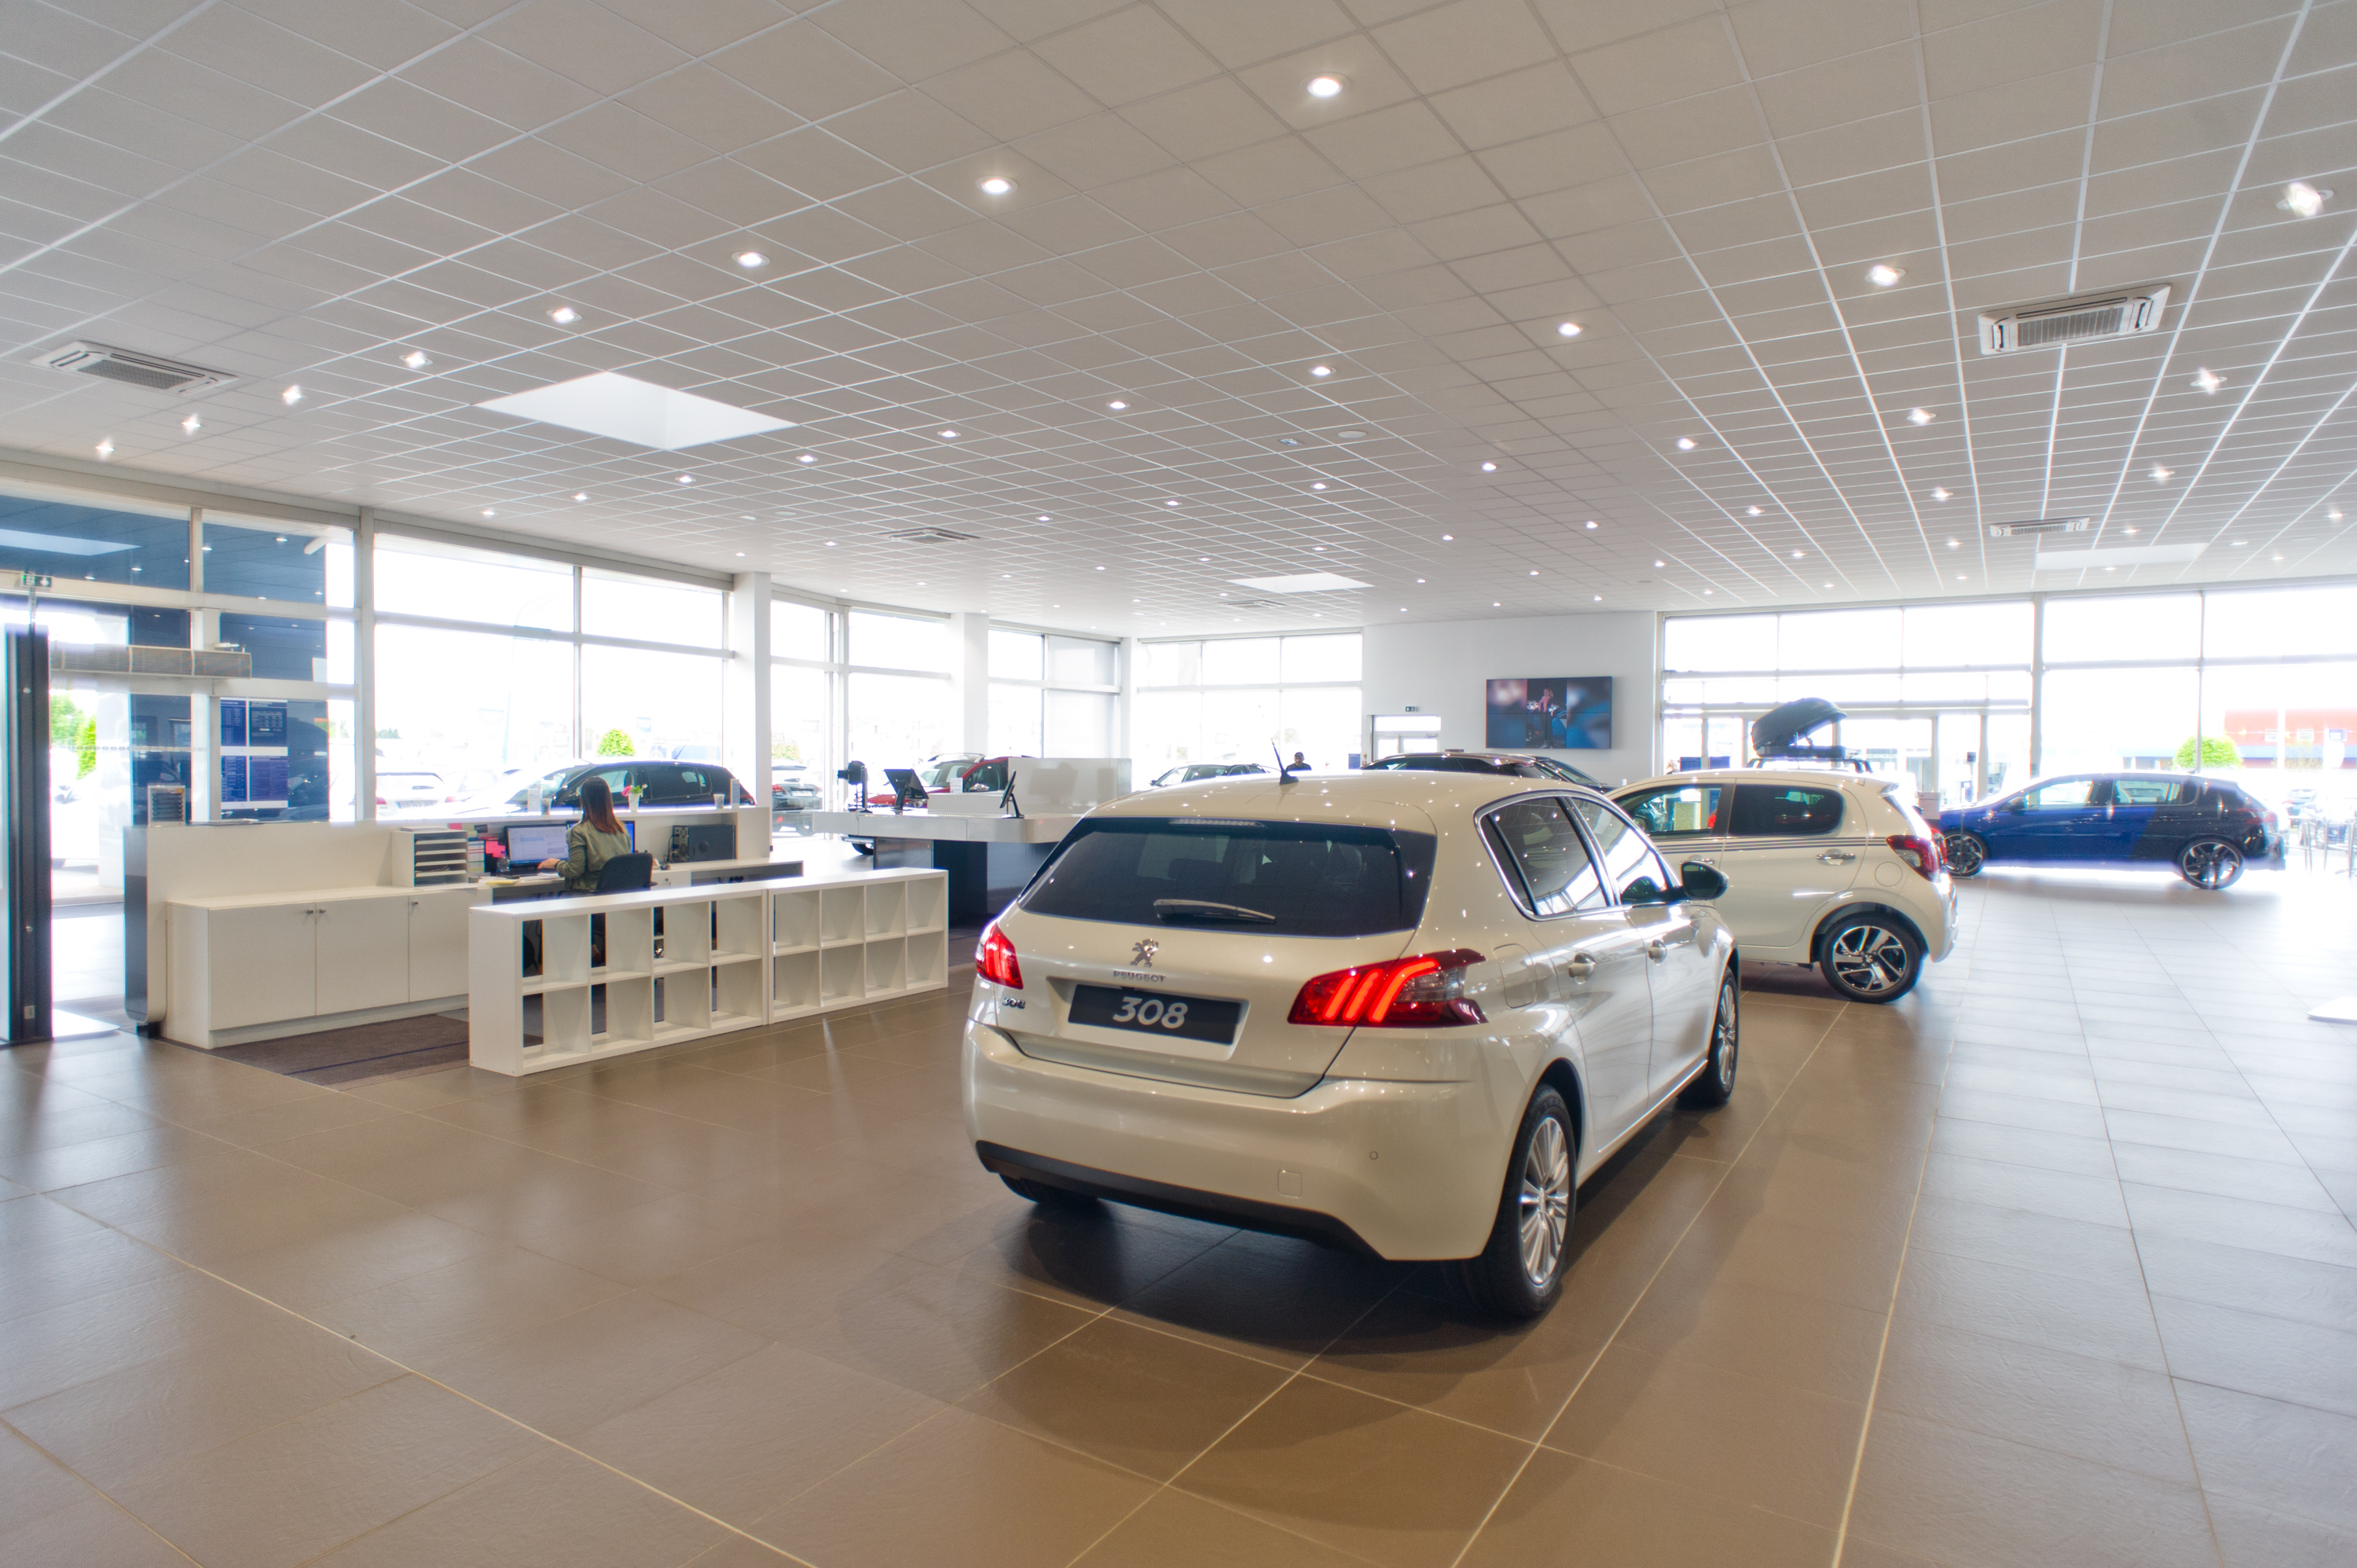 PEUGEOT POITIERS - ABCIS BY AUTOSPHERE